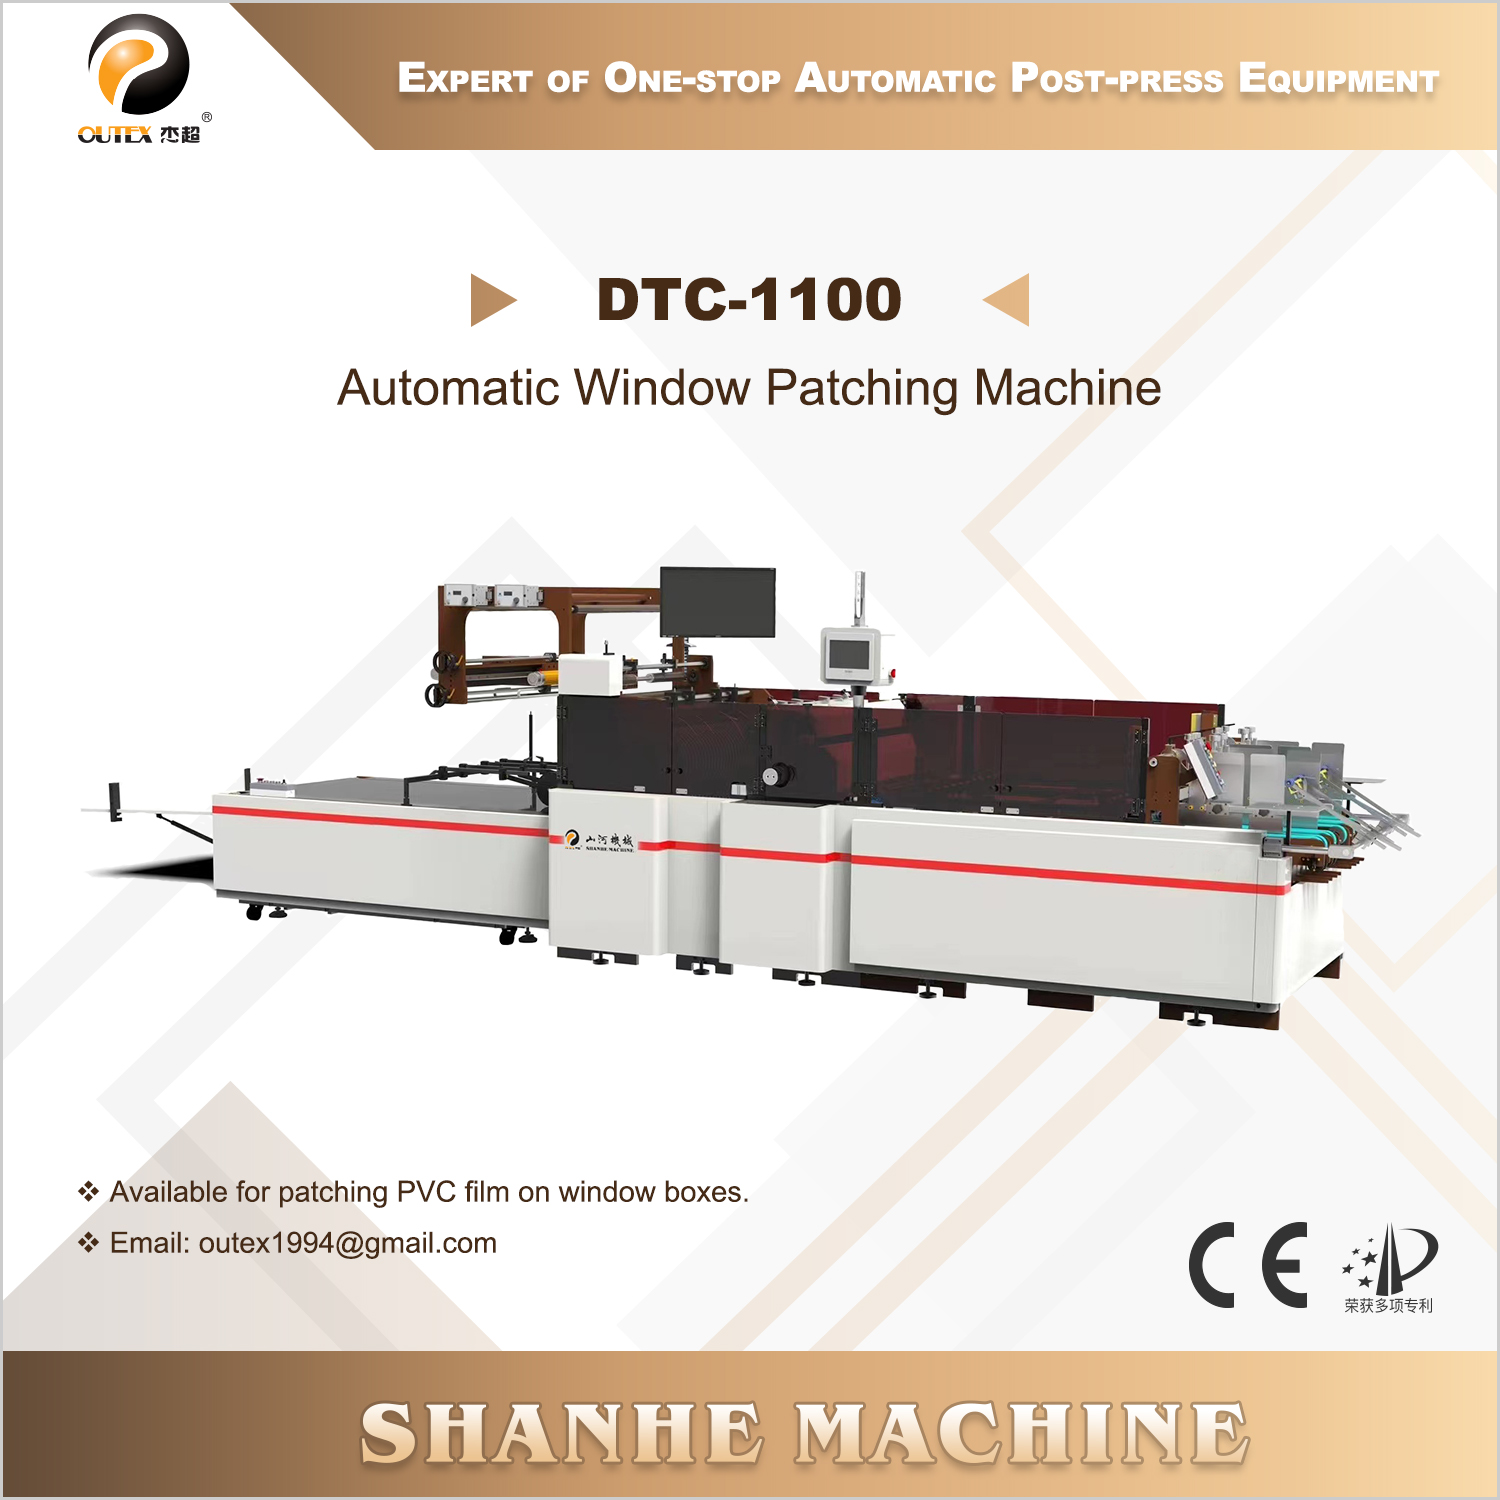 DTC-1100 Automatic Window Patching Machine (Dual Channel)